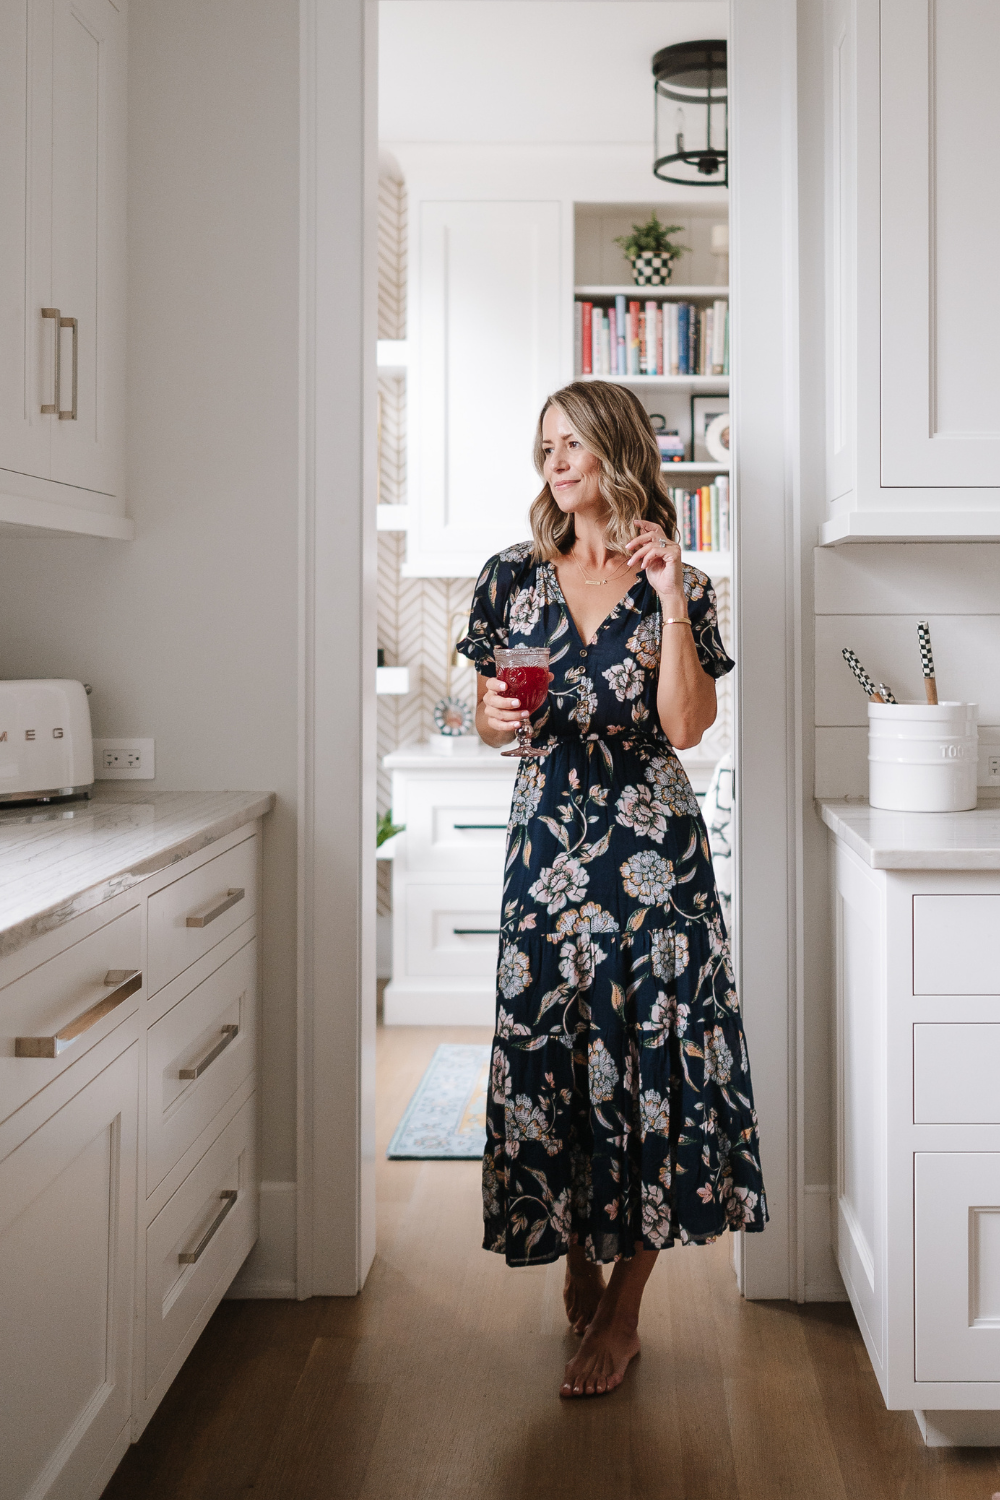 Suzanne wearing a floral printed maxi dress and drinking Kombucha